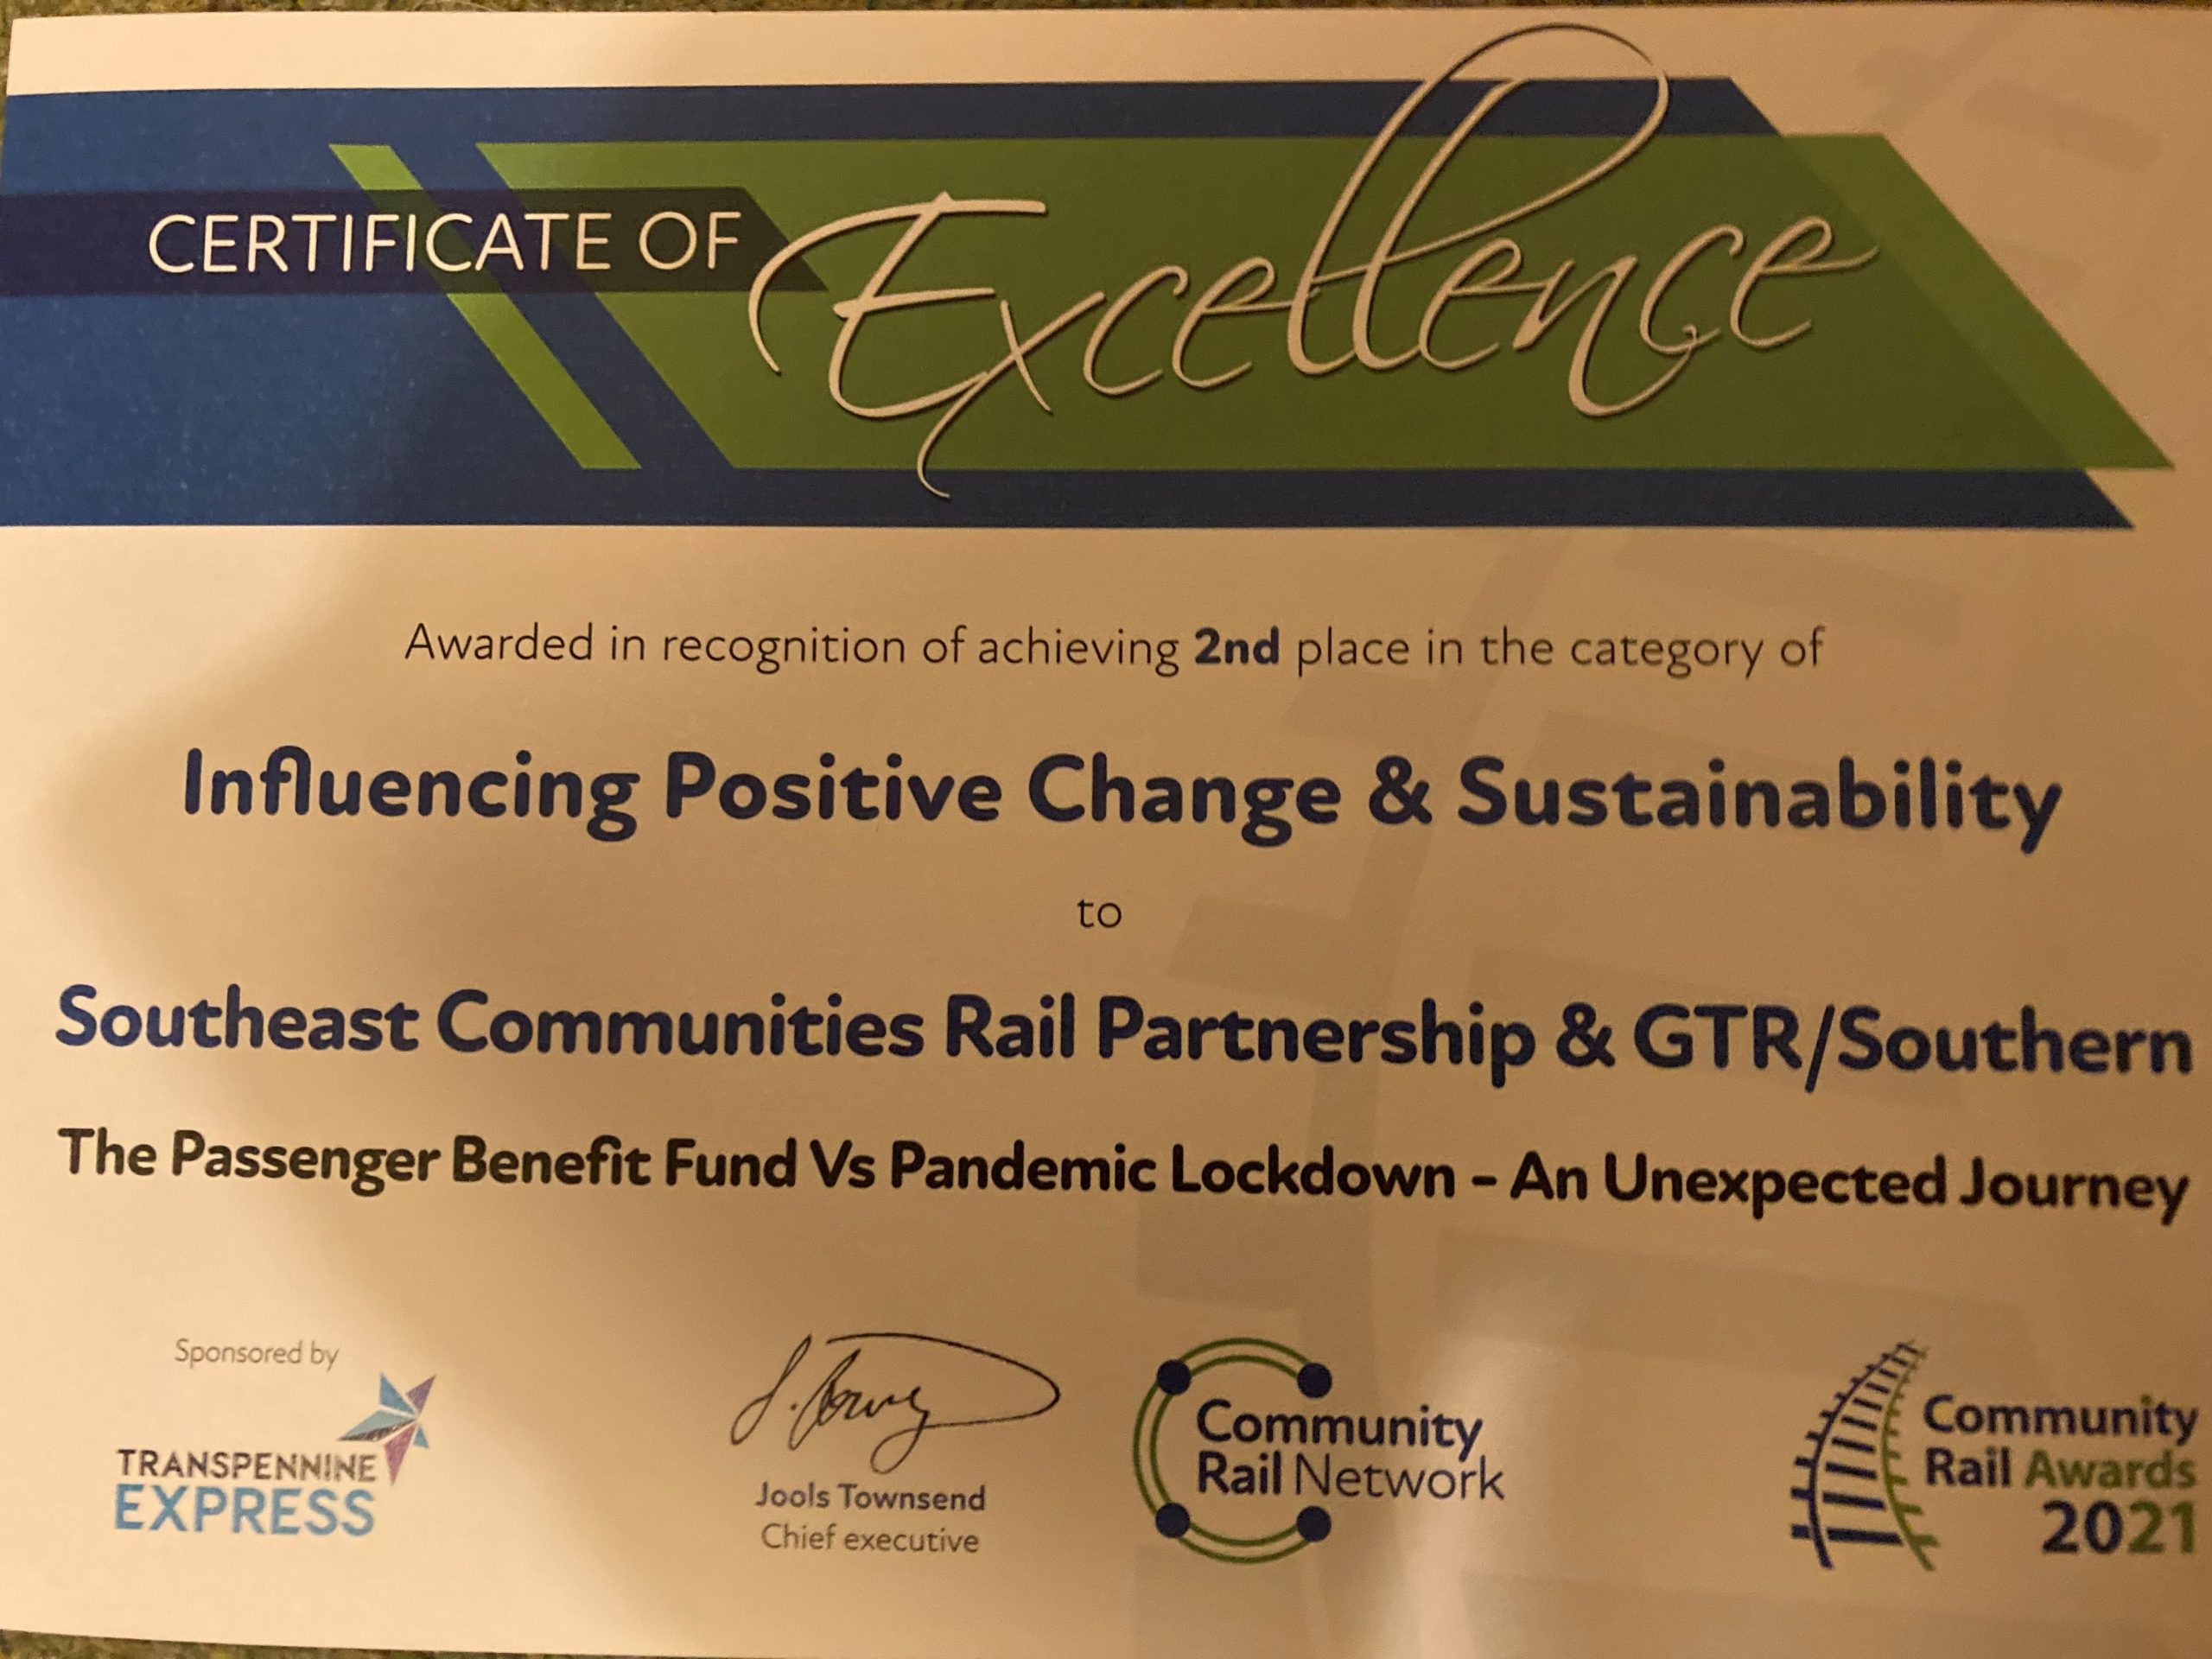 Another win for Southeast Communities Rail Partnership